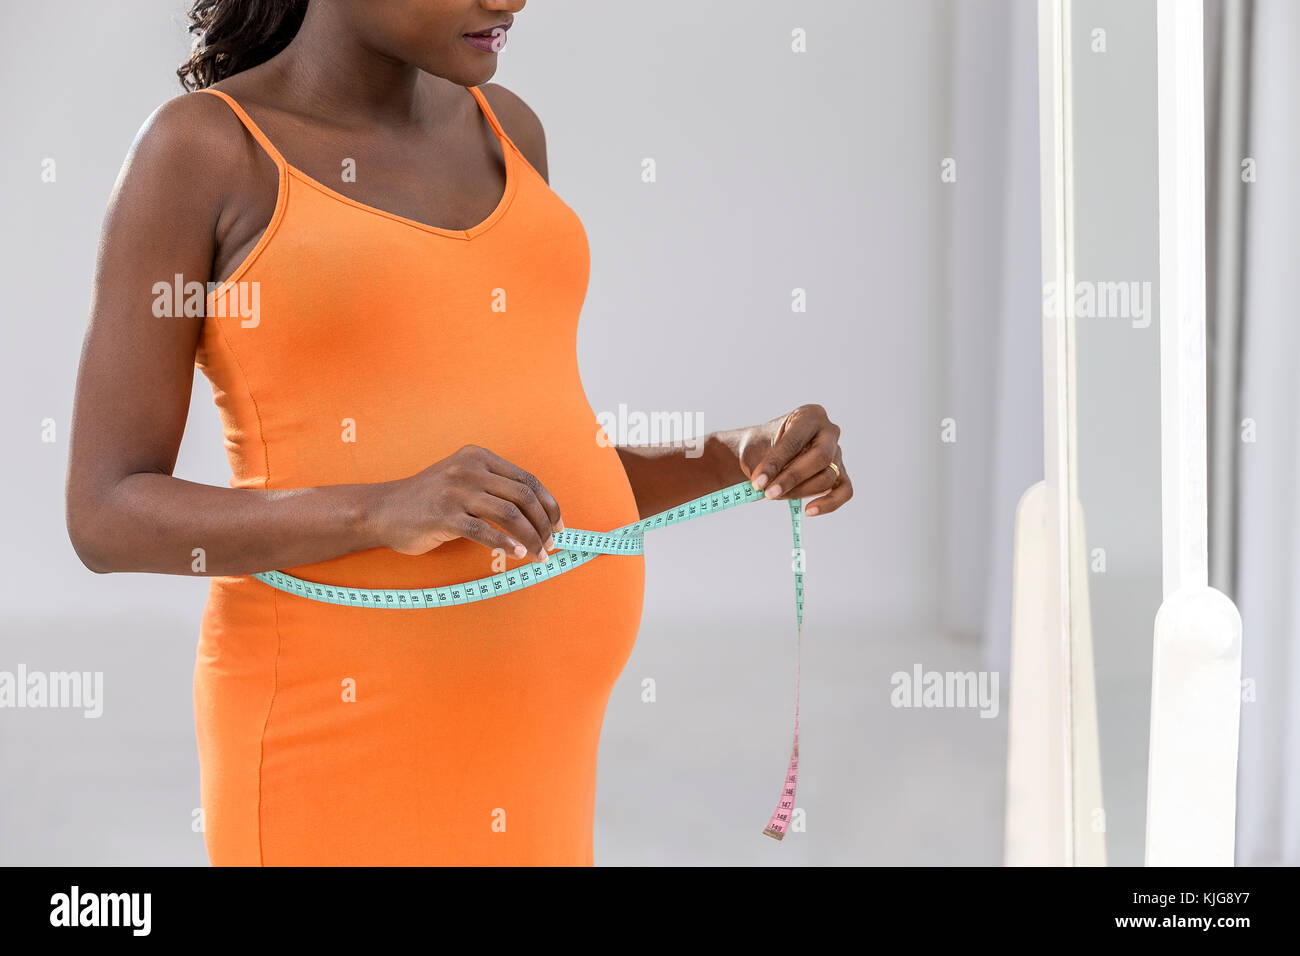 Pregnant woman measuring her belly with the tape profile view Stock Photo